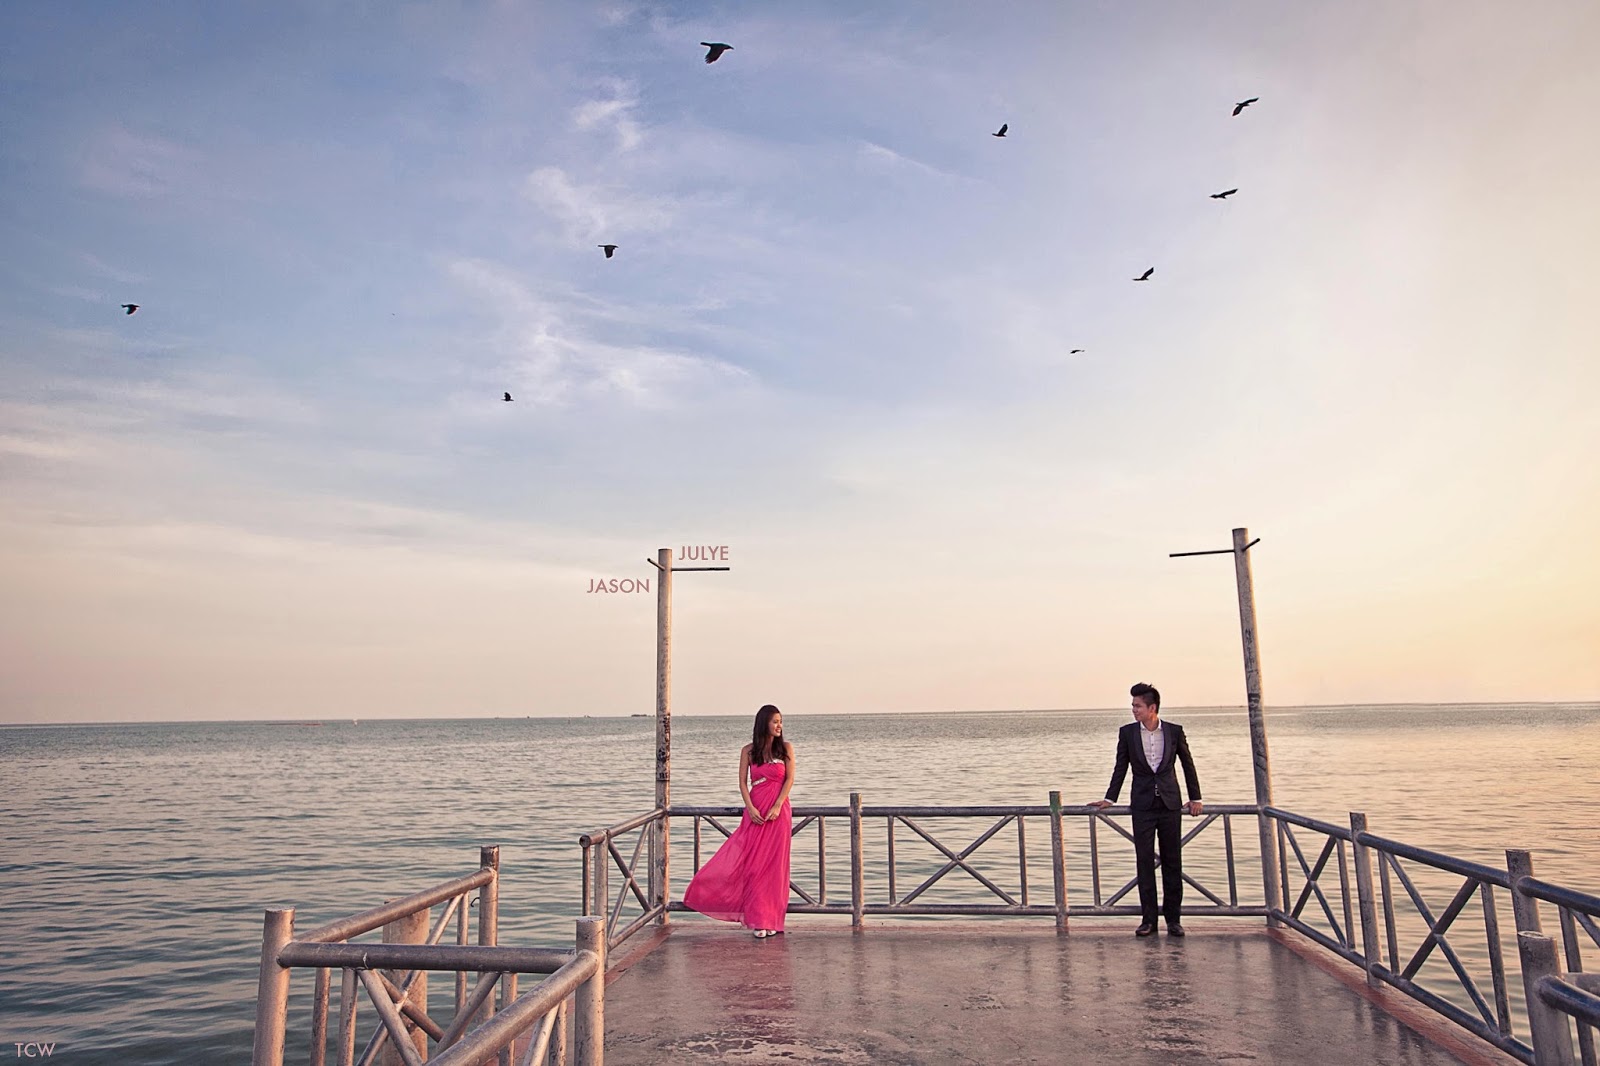 Pre-wedding photoshoot in Malacca. Photo by TCW Photography